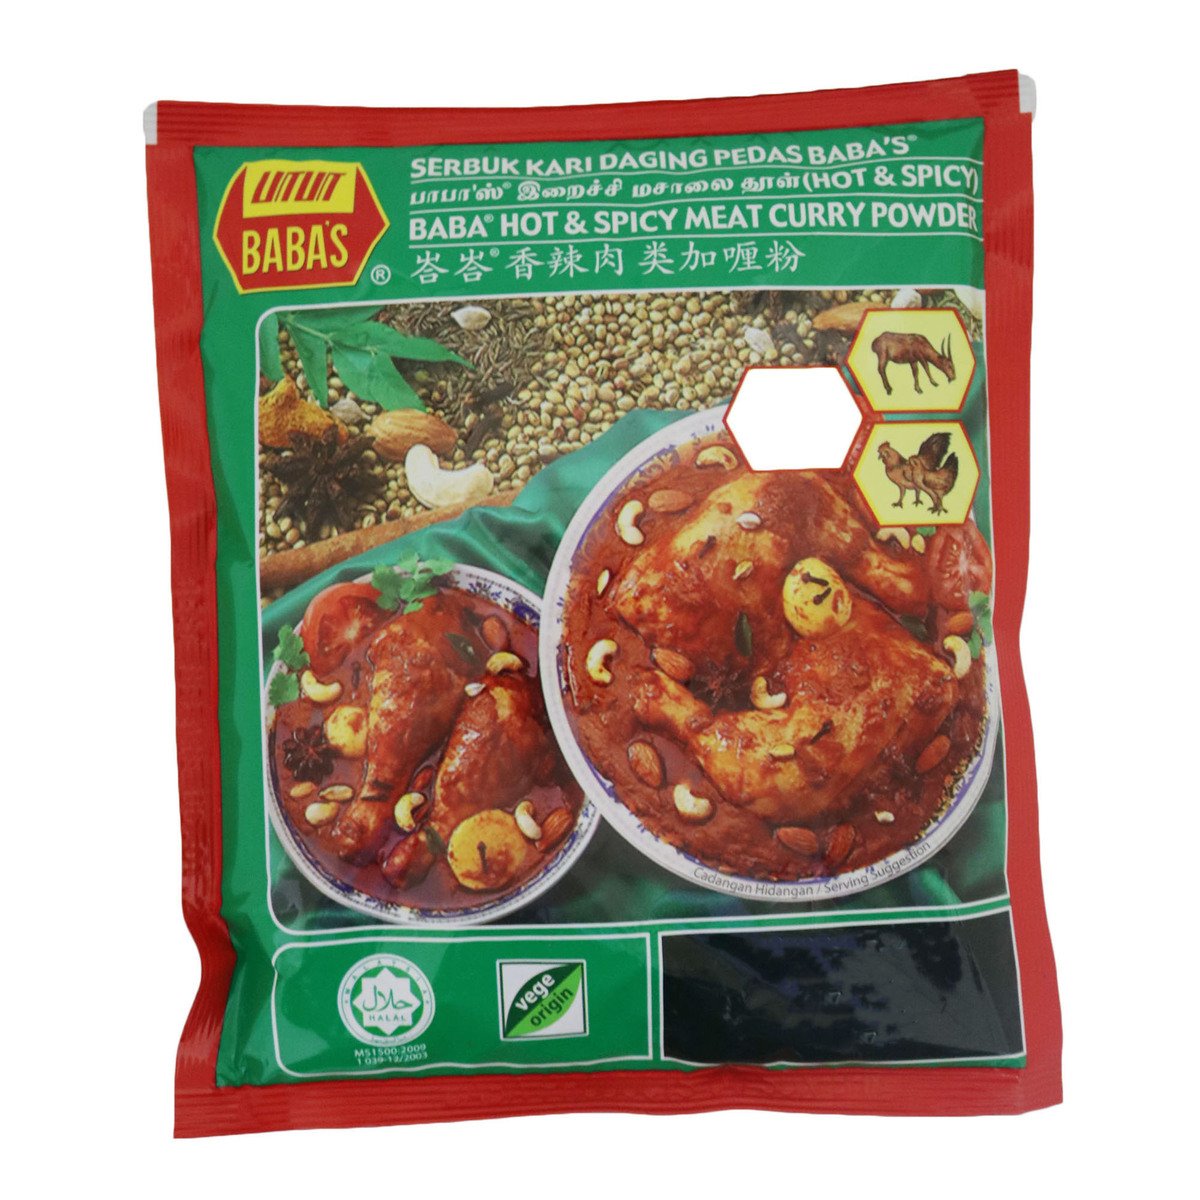 Babas Hot & Spicy Meat Curry Powder 250g